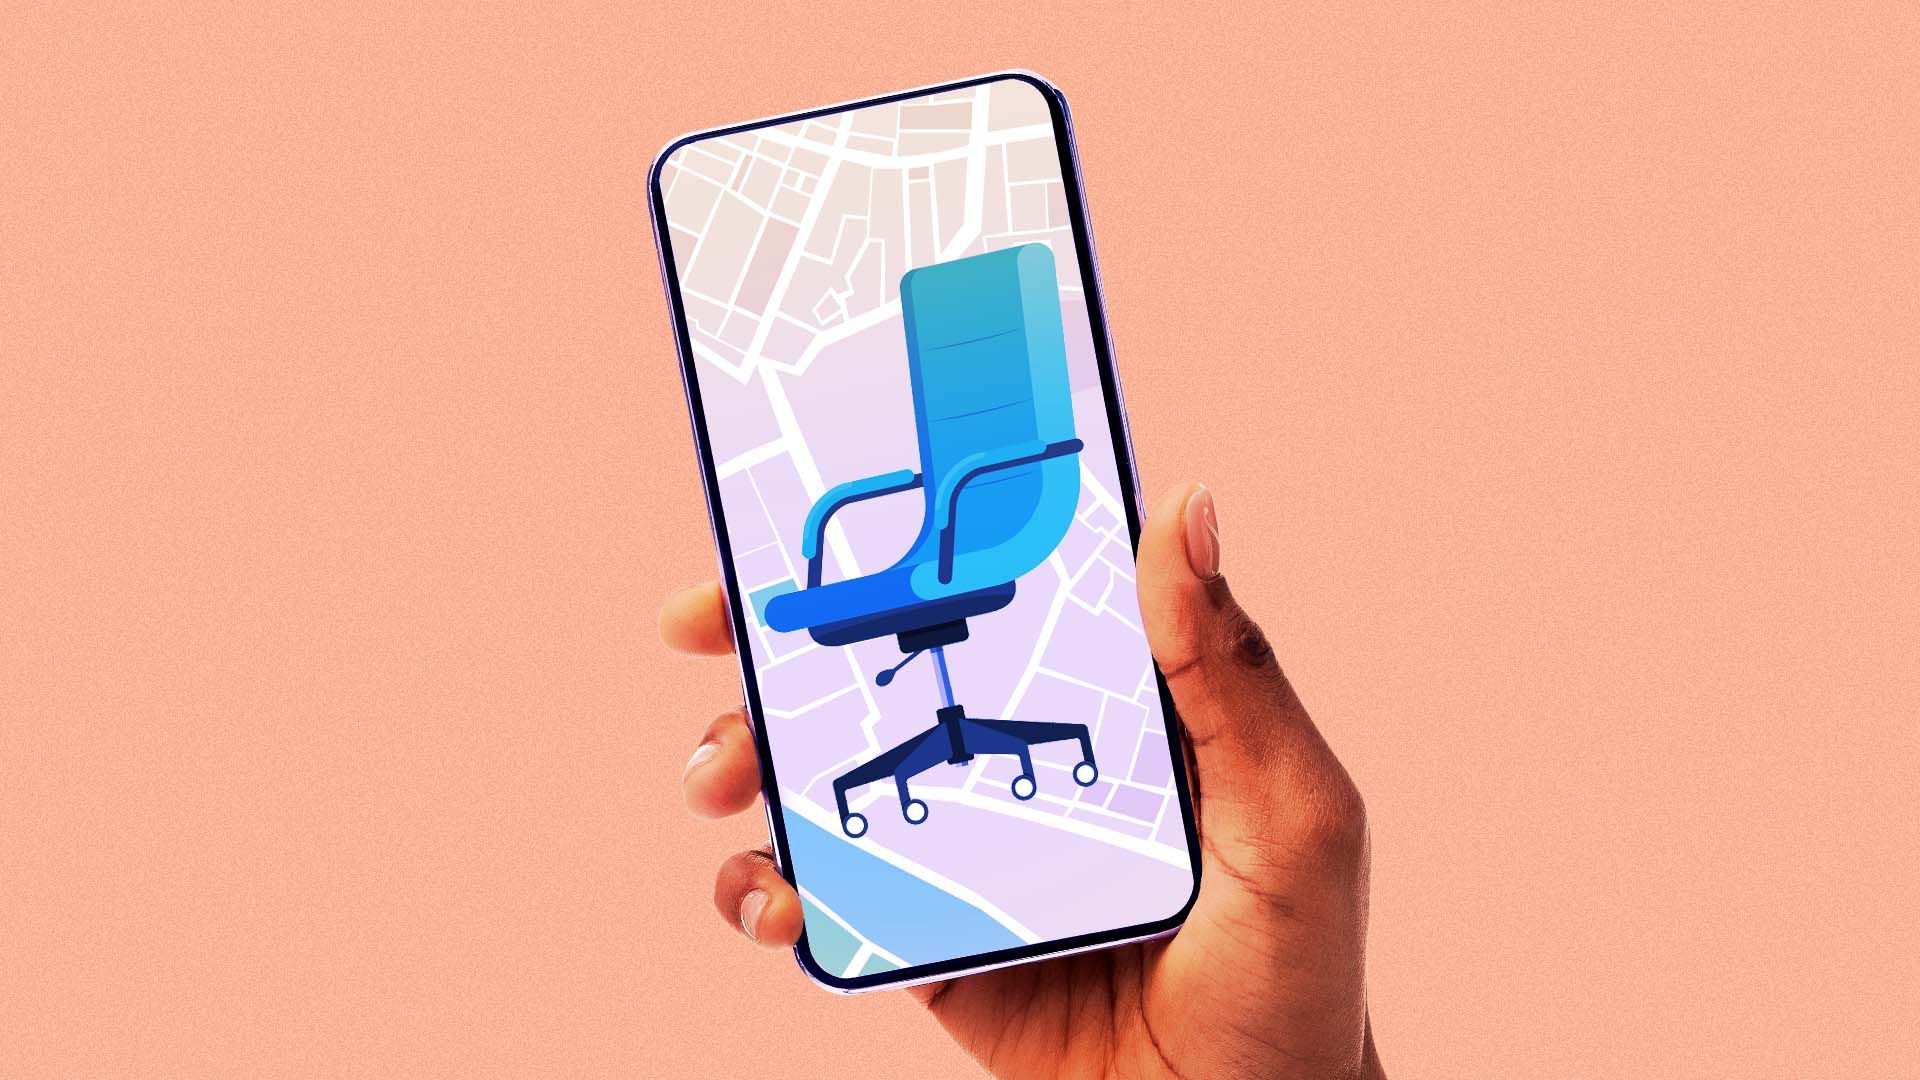 Illustration of person holding a phone with an uber-like app with an office chair